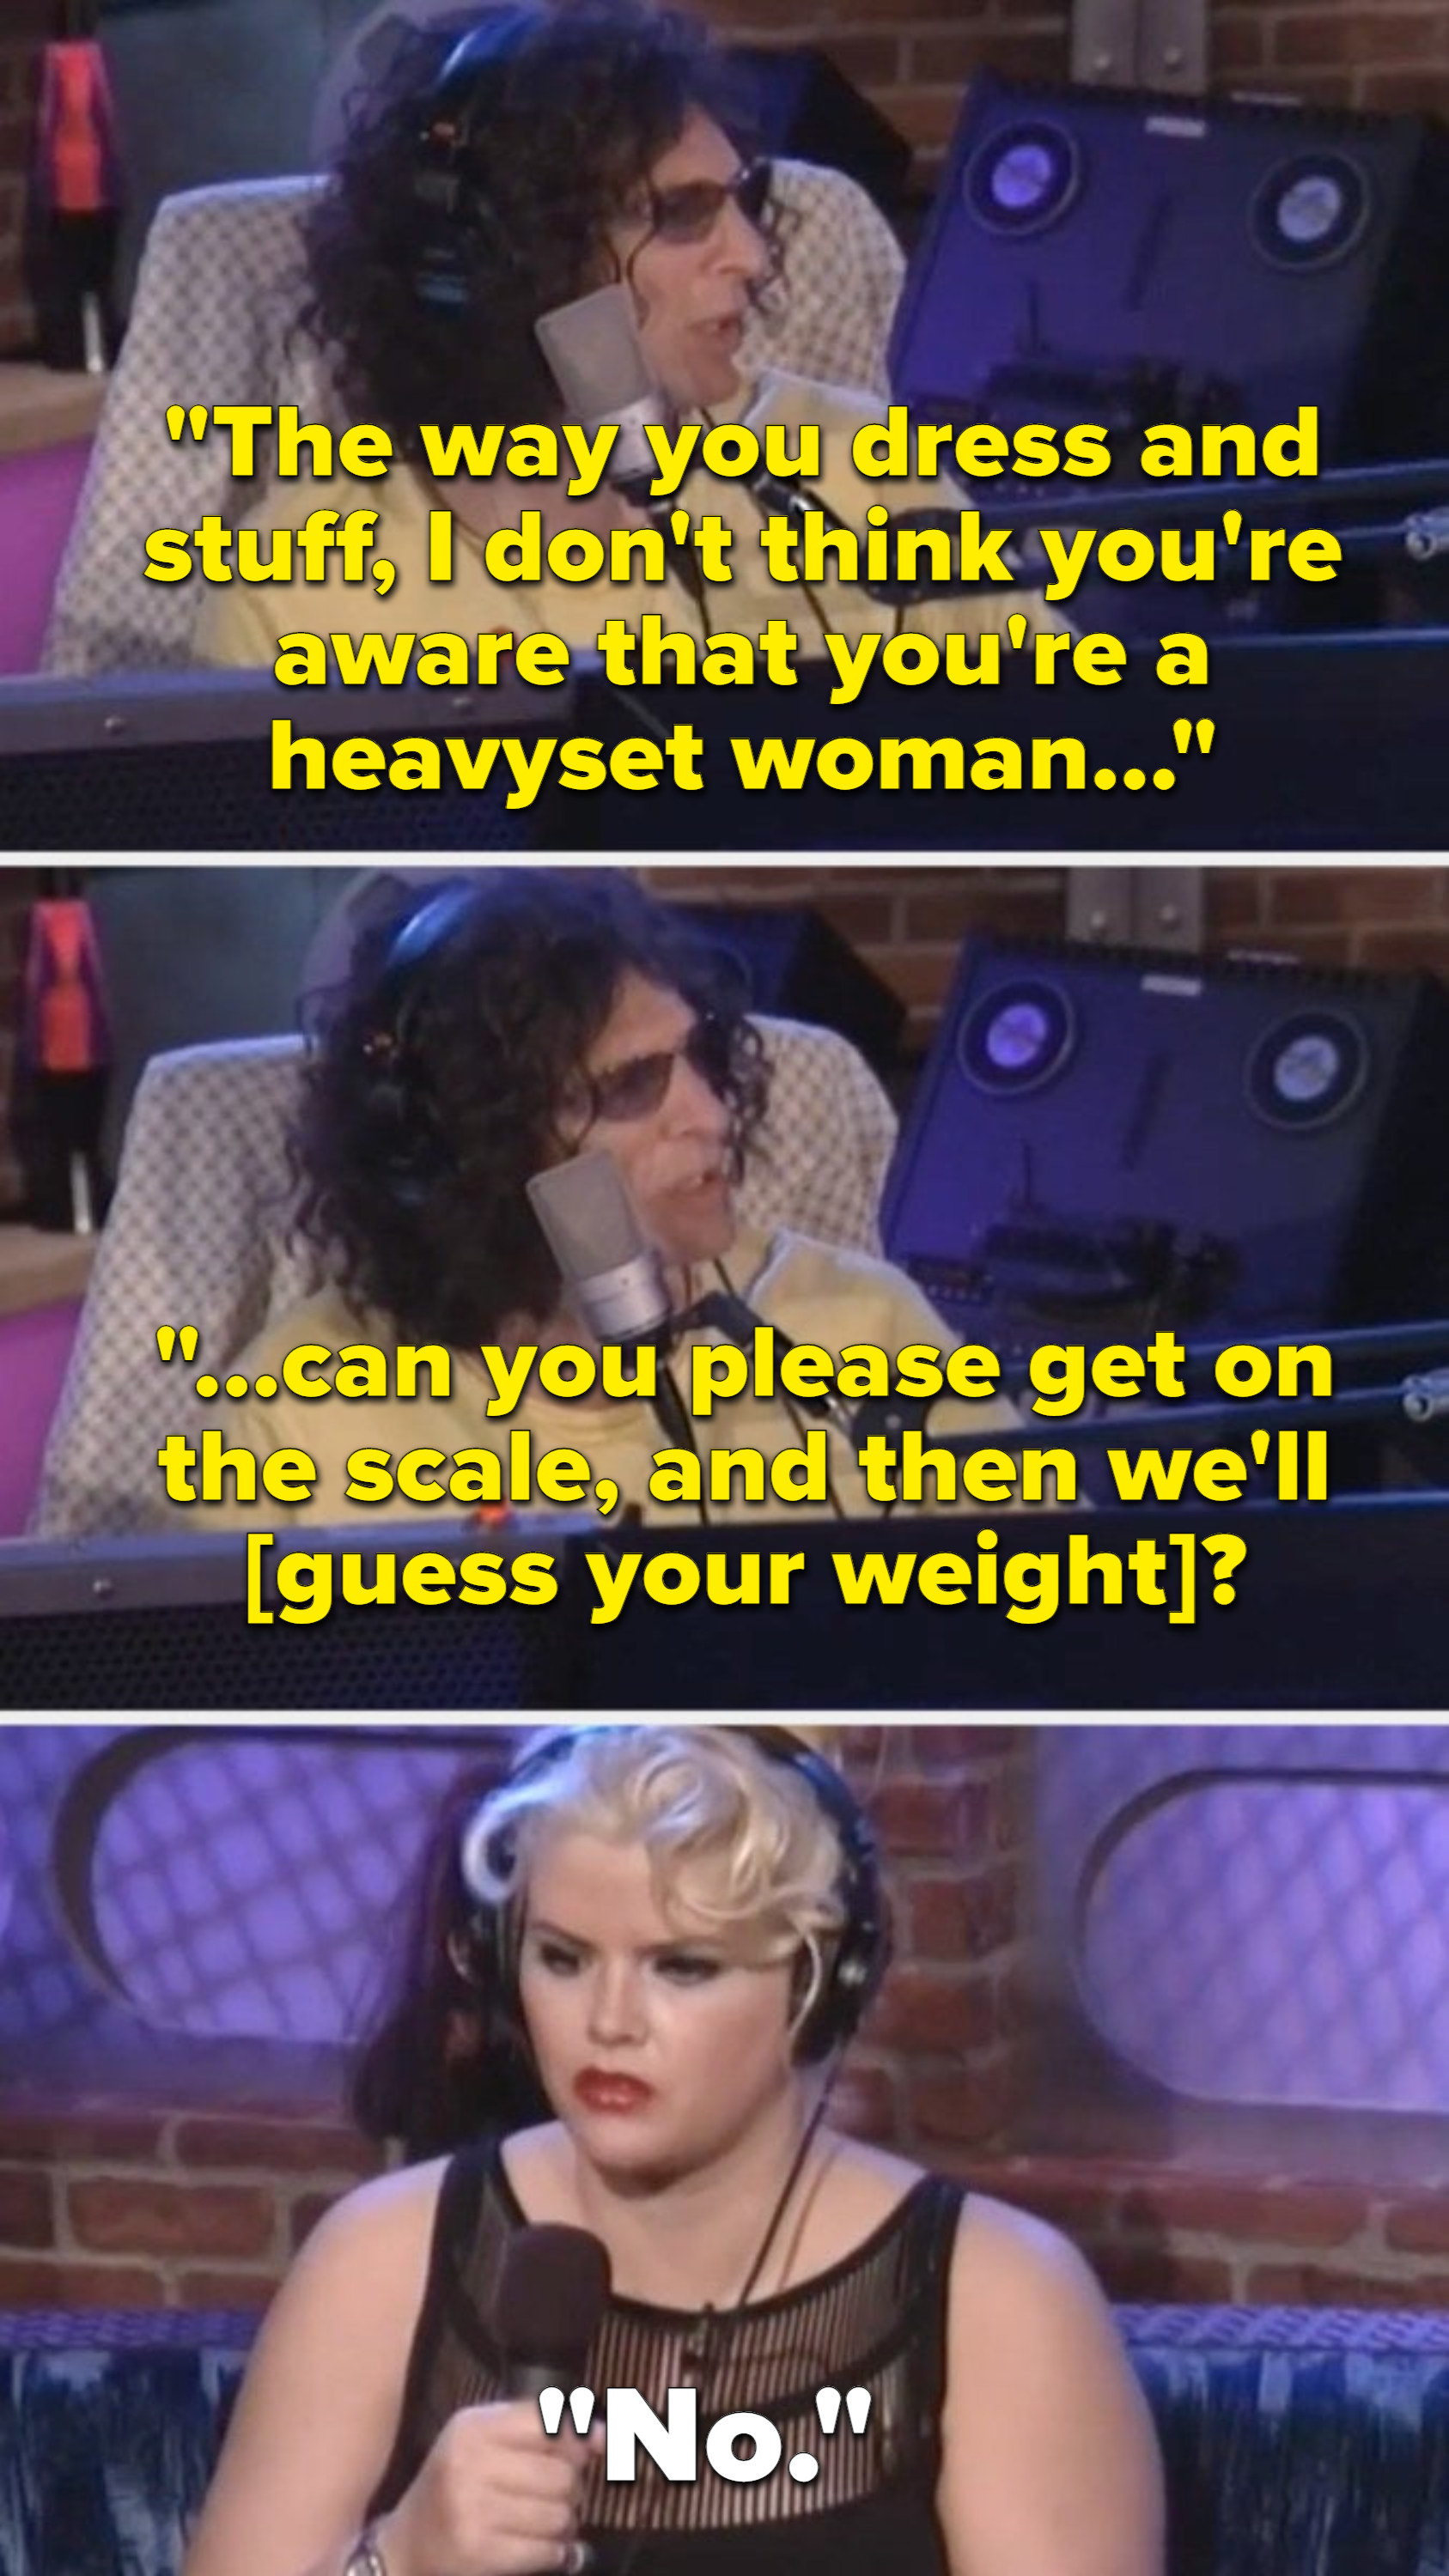 Howard telling anna nicole she dresses like she doesn&#x27;t know. she&#x27;s a heavyset woman, and asking her to get on the scale so he could guess her weight